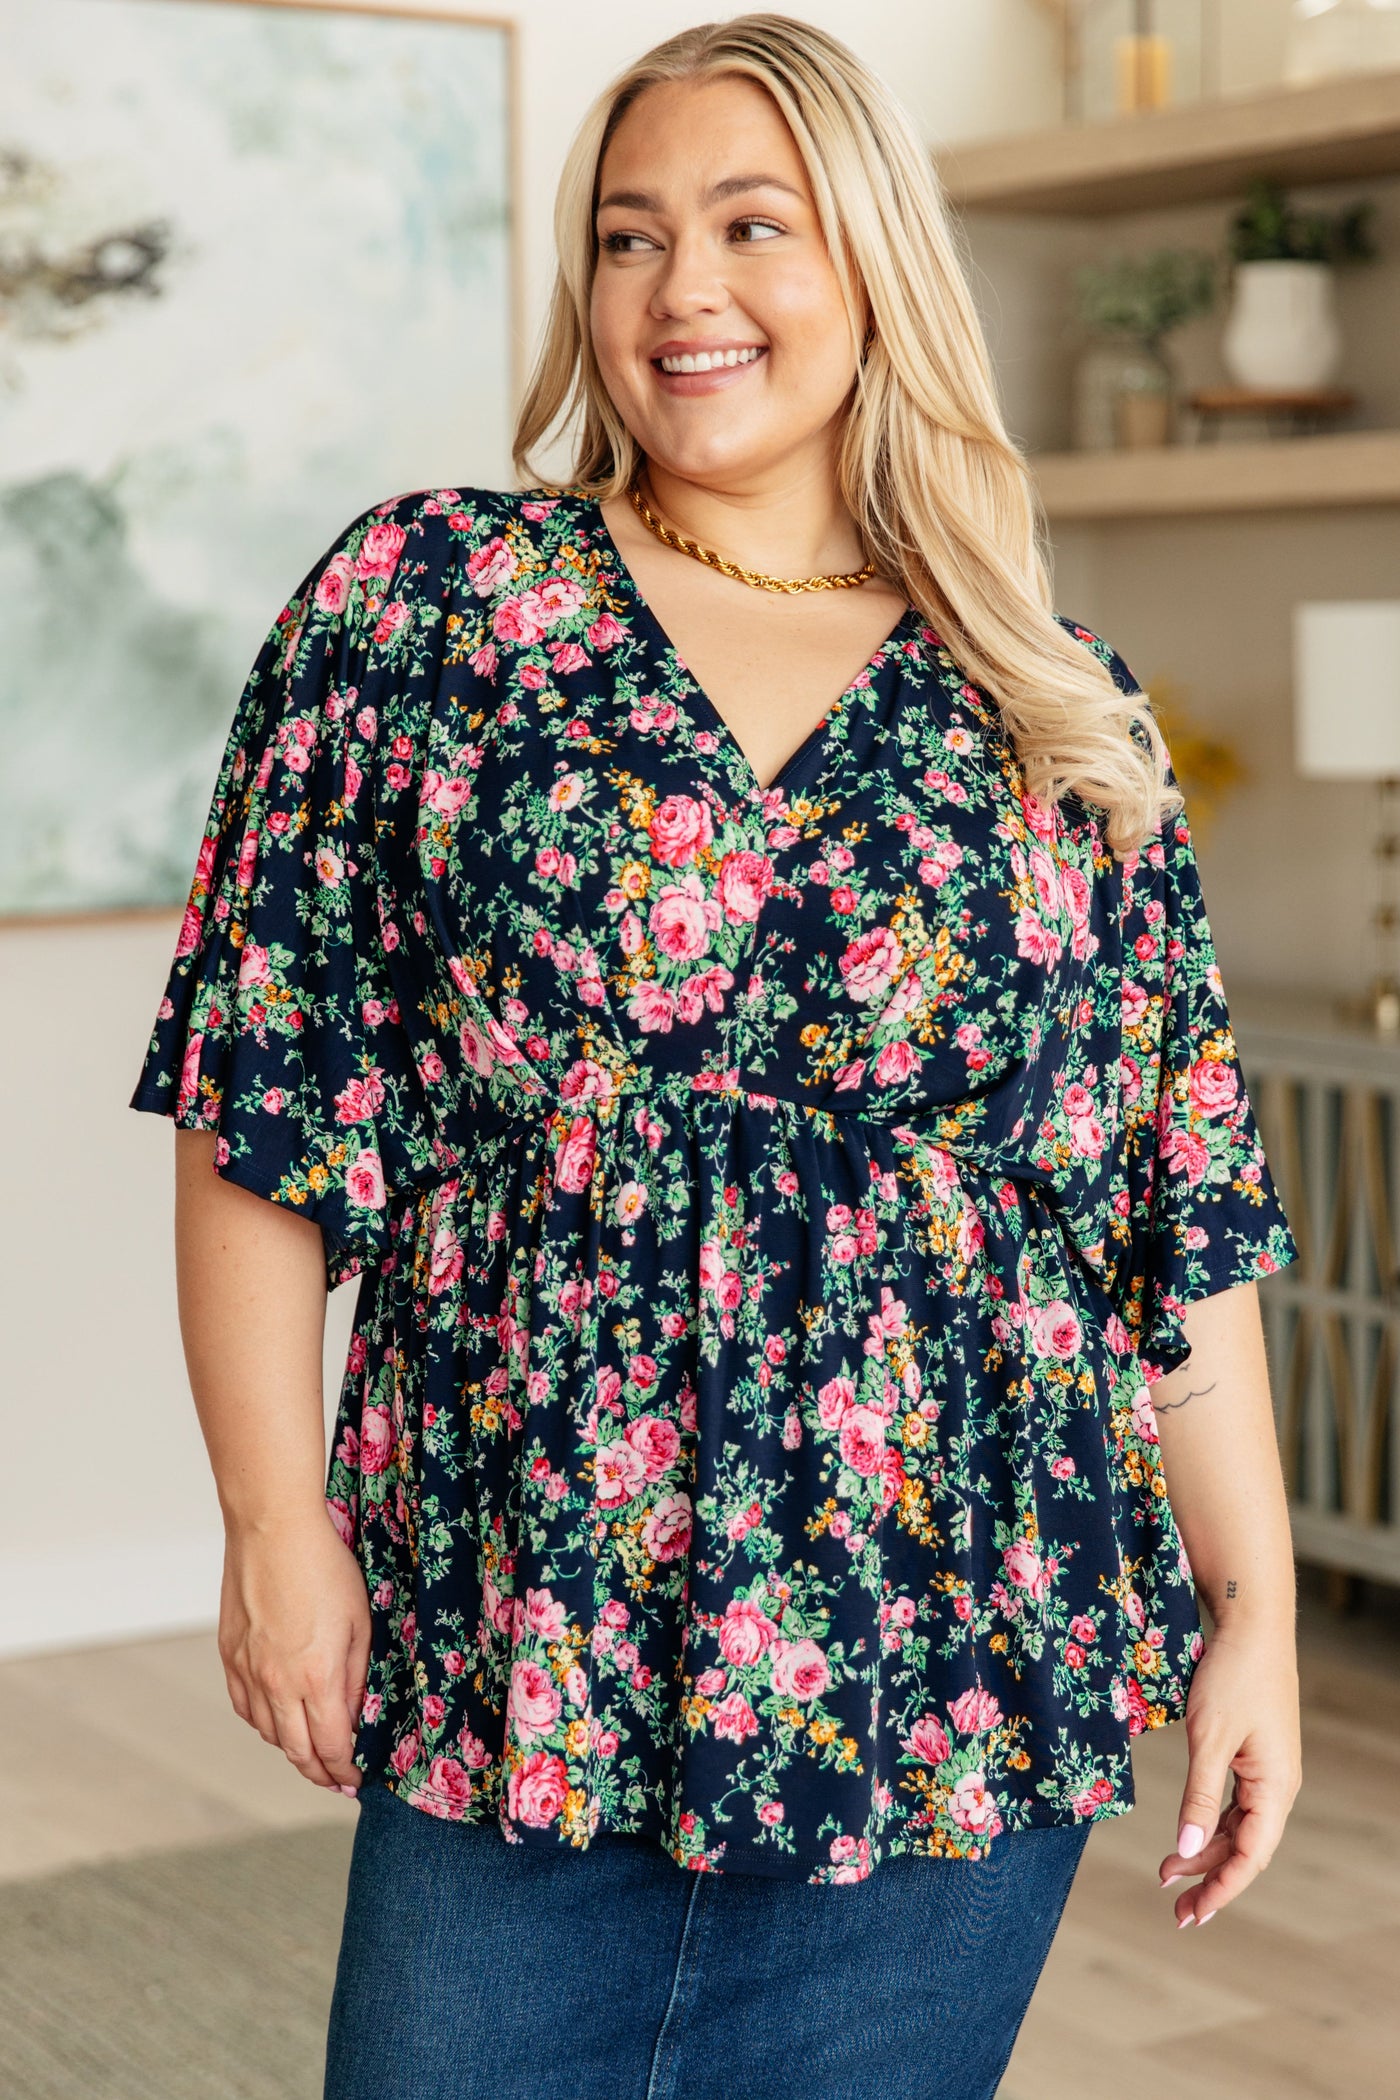 Dreamer Top in Navy and Pink Vintage Bouquet-Tops-Ave Shops-Market Street Nest, Fashionable Clothing, Shoes and Home Décor Located in Mabank, TX